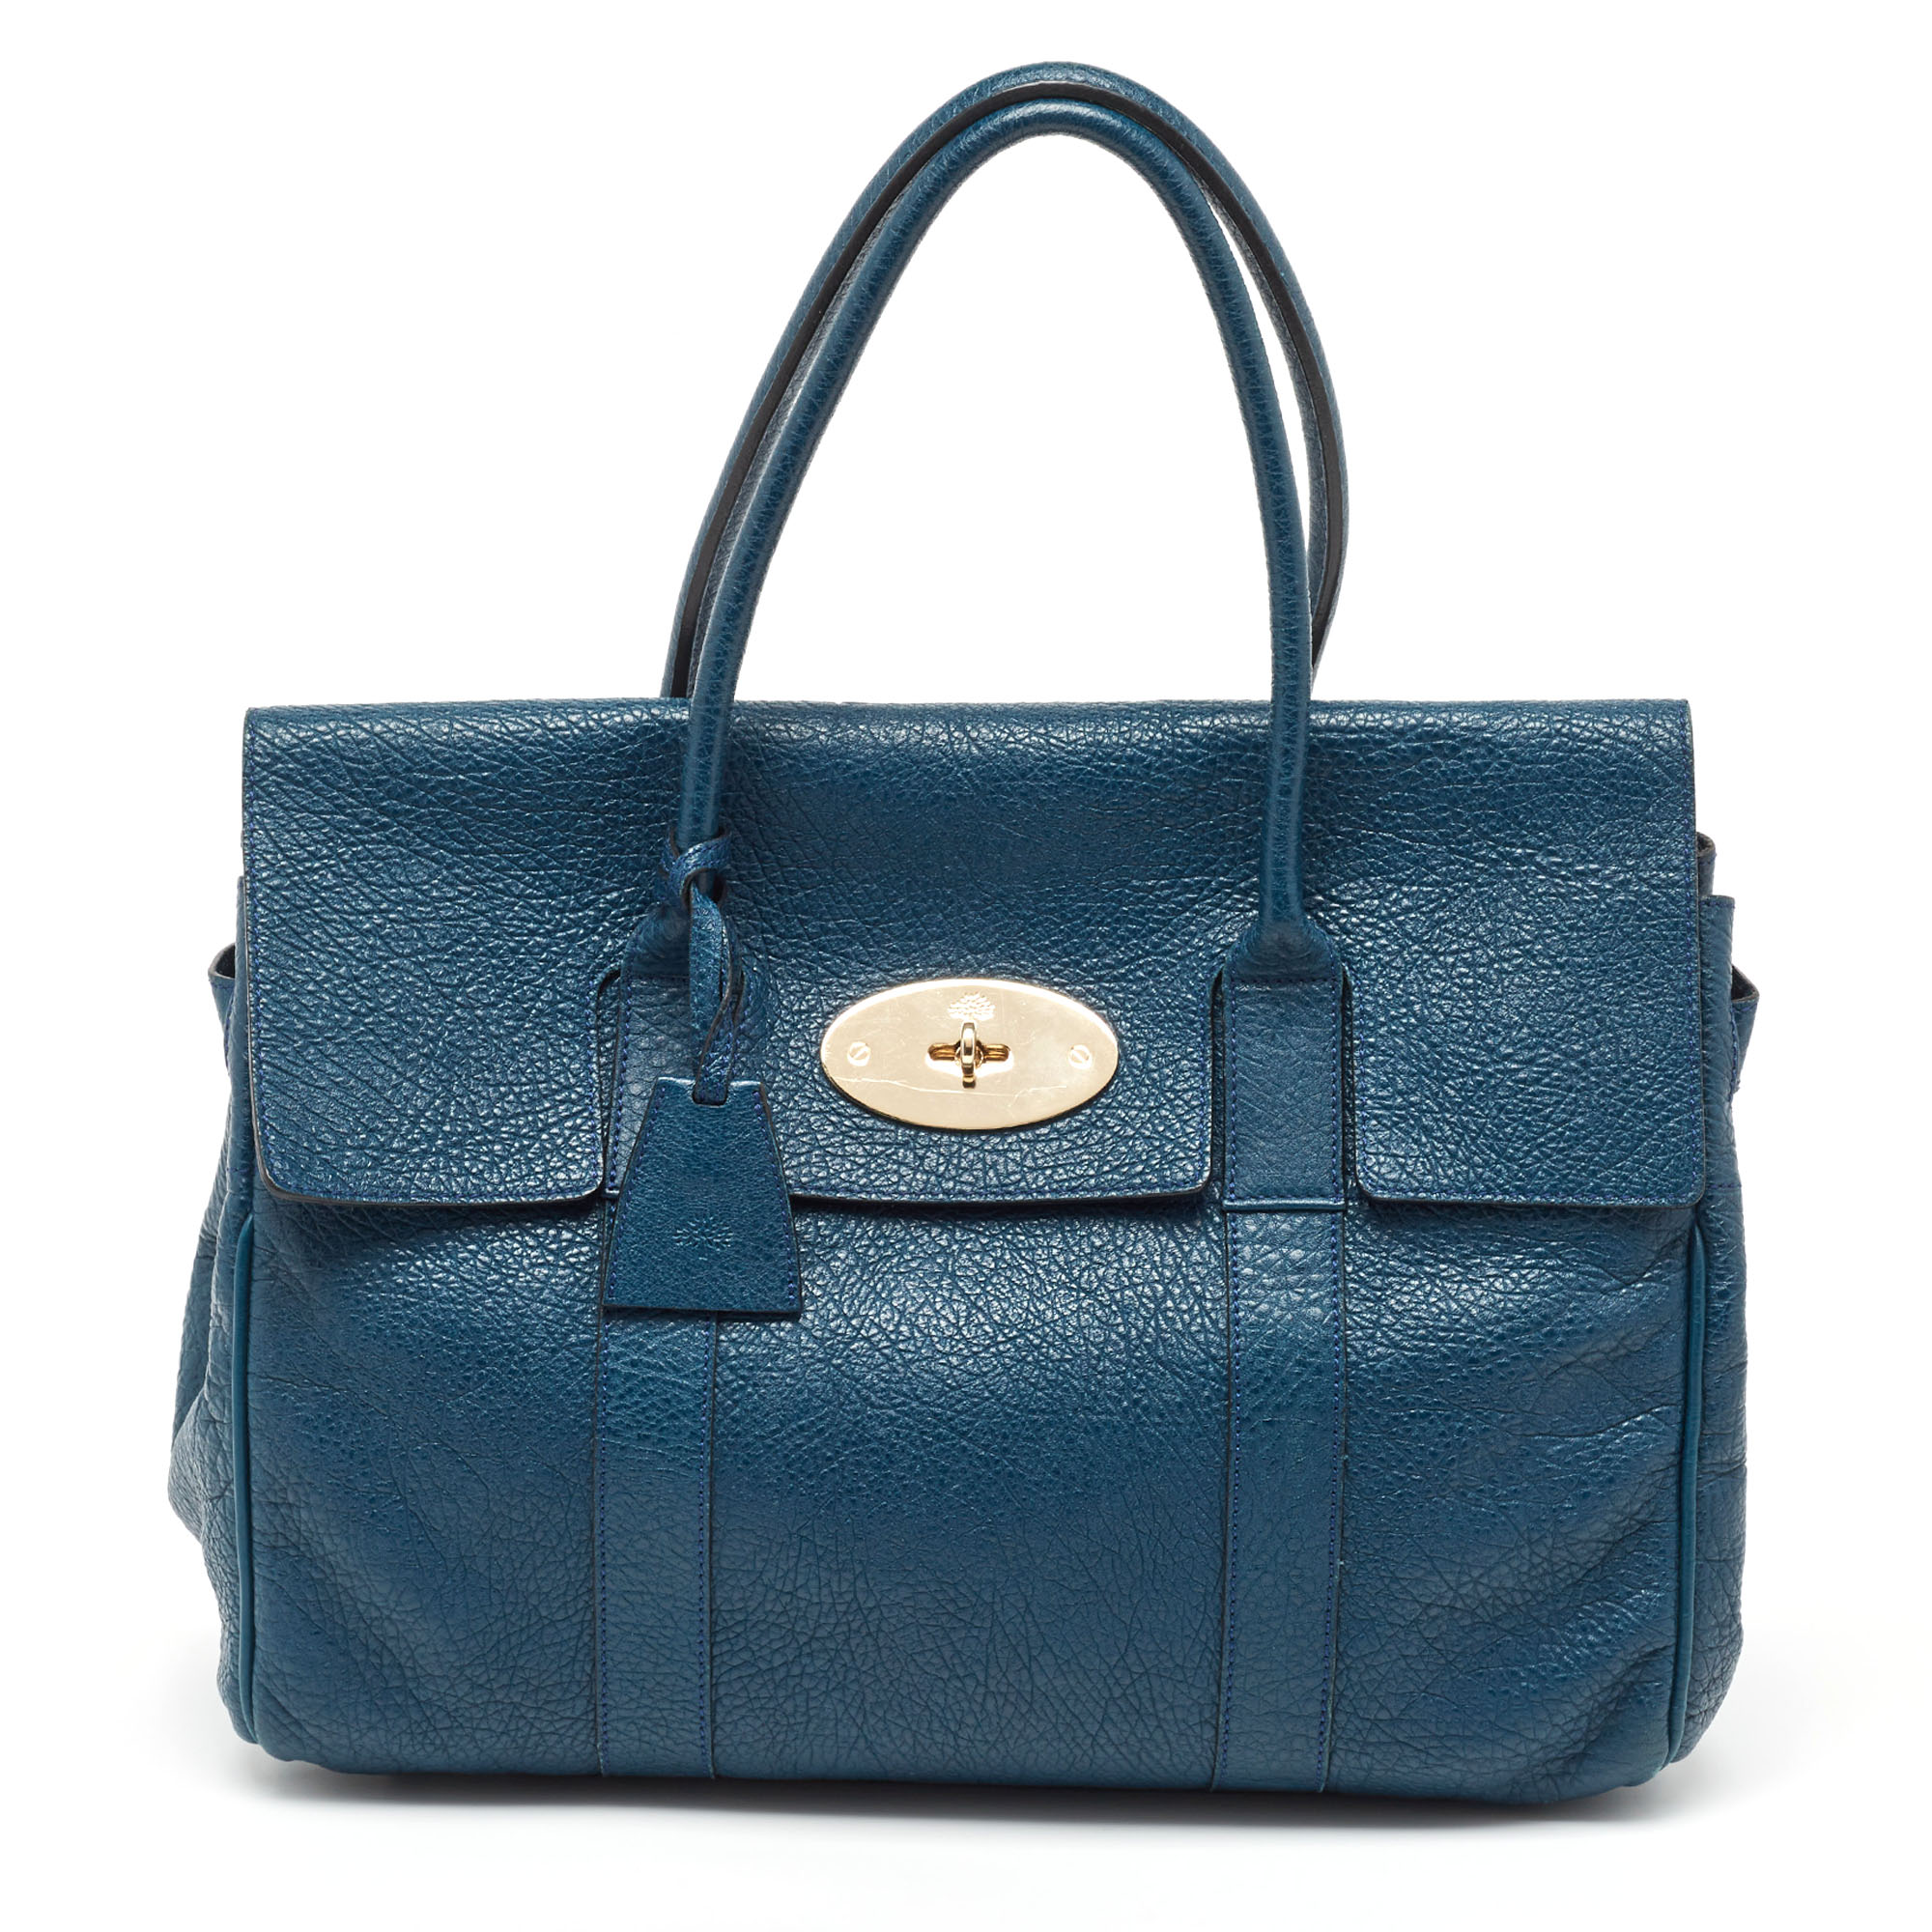 Pre-owned Mulberry Teal Blue Leather Bayswater Satchel